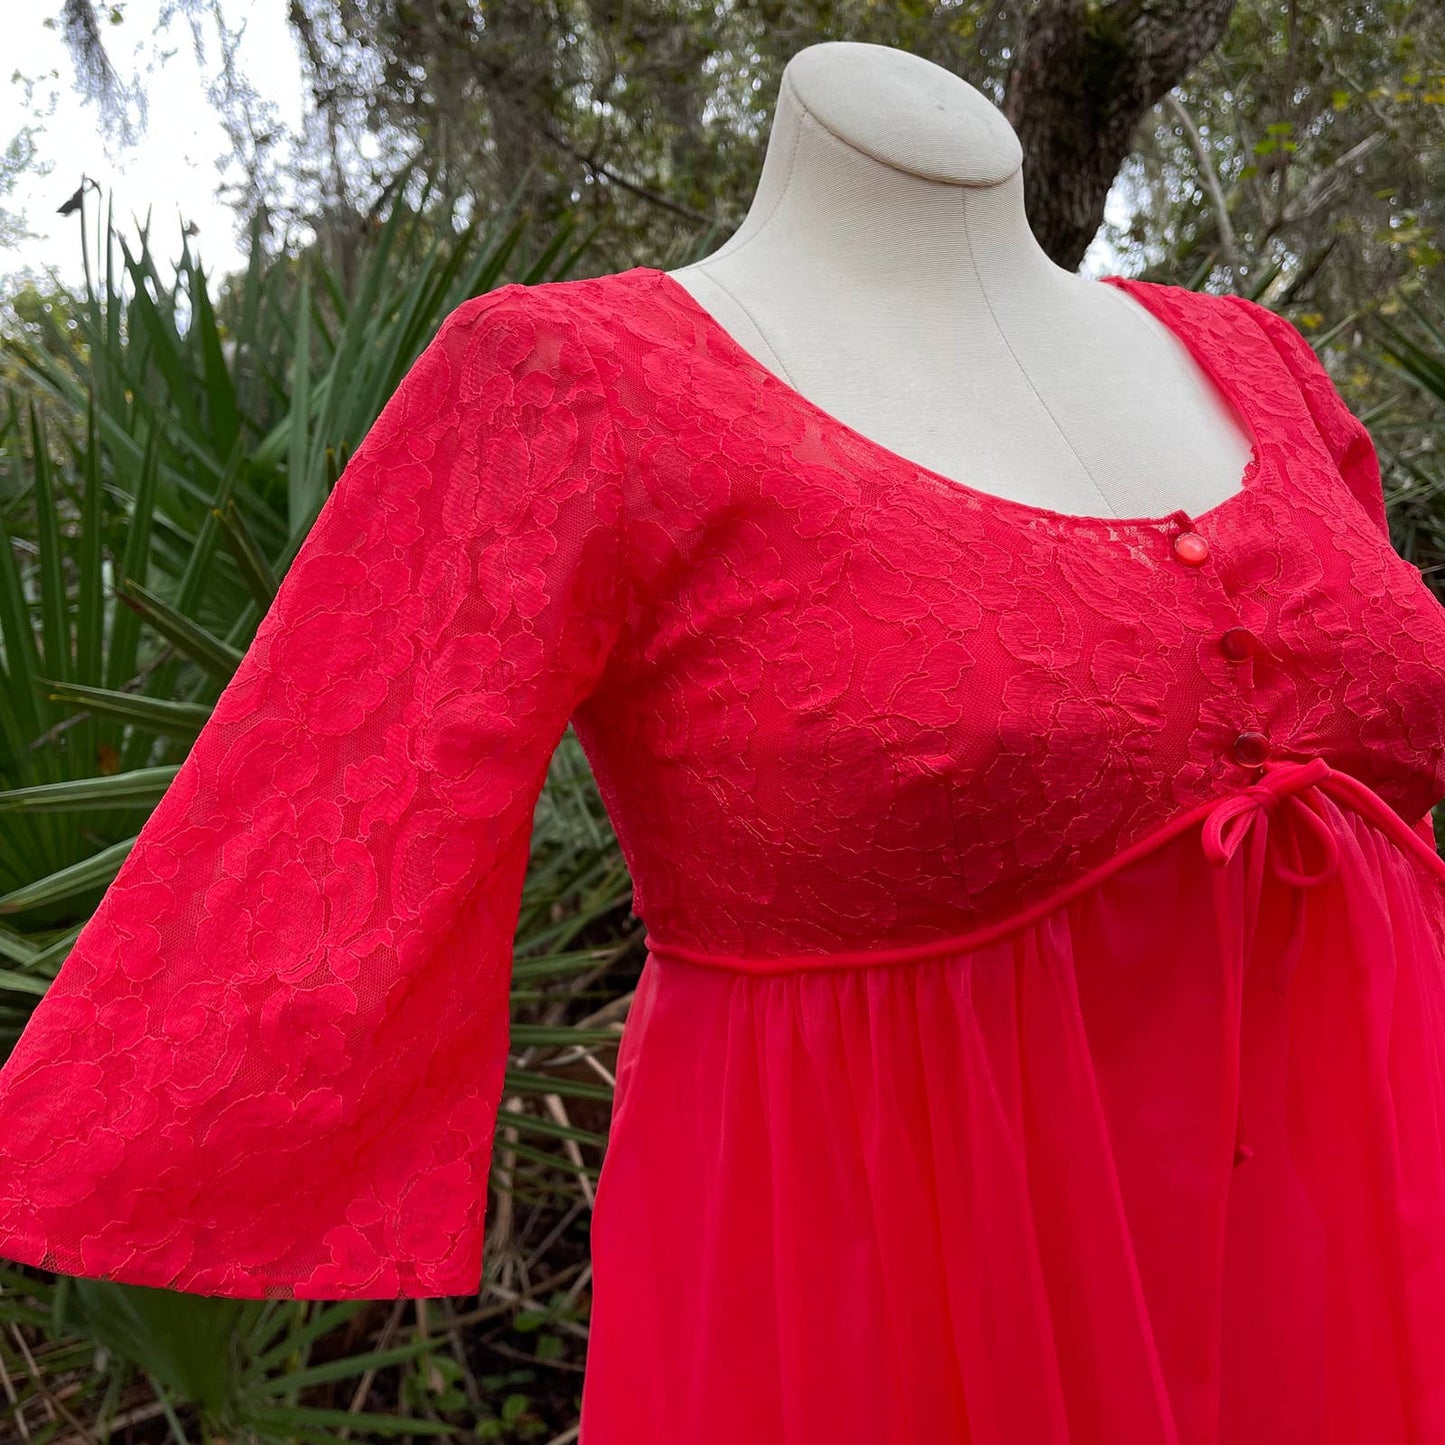 Vintage 50s Ethereal Red Chiffon Nightgown and Peignoir Set Lisette Size 34